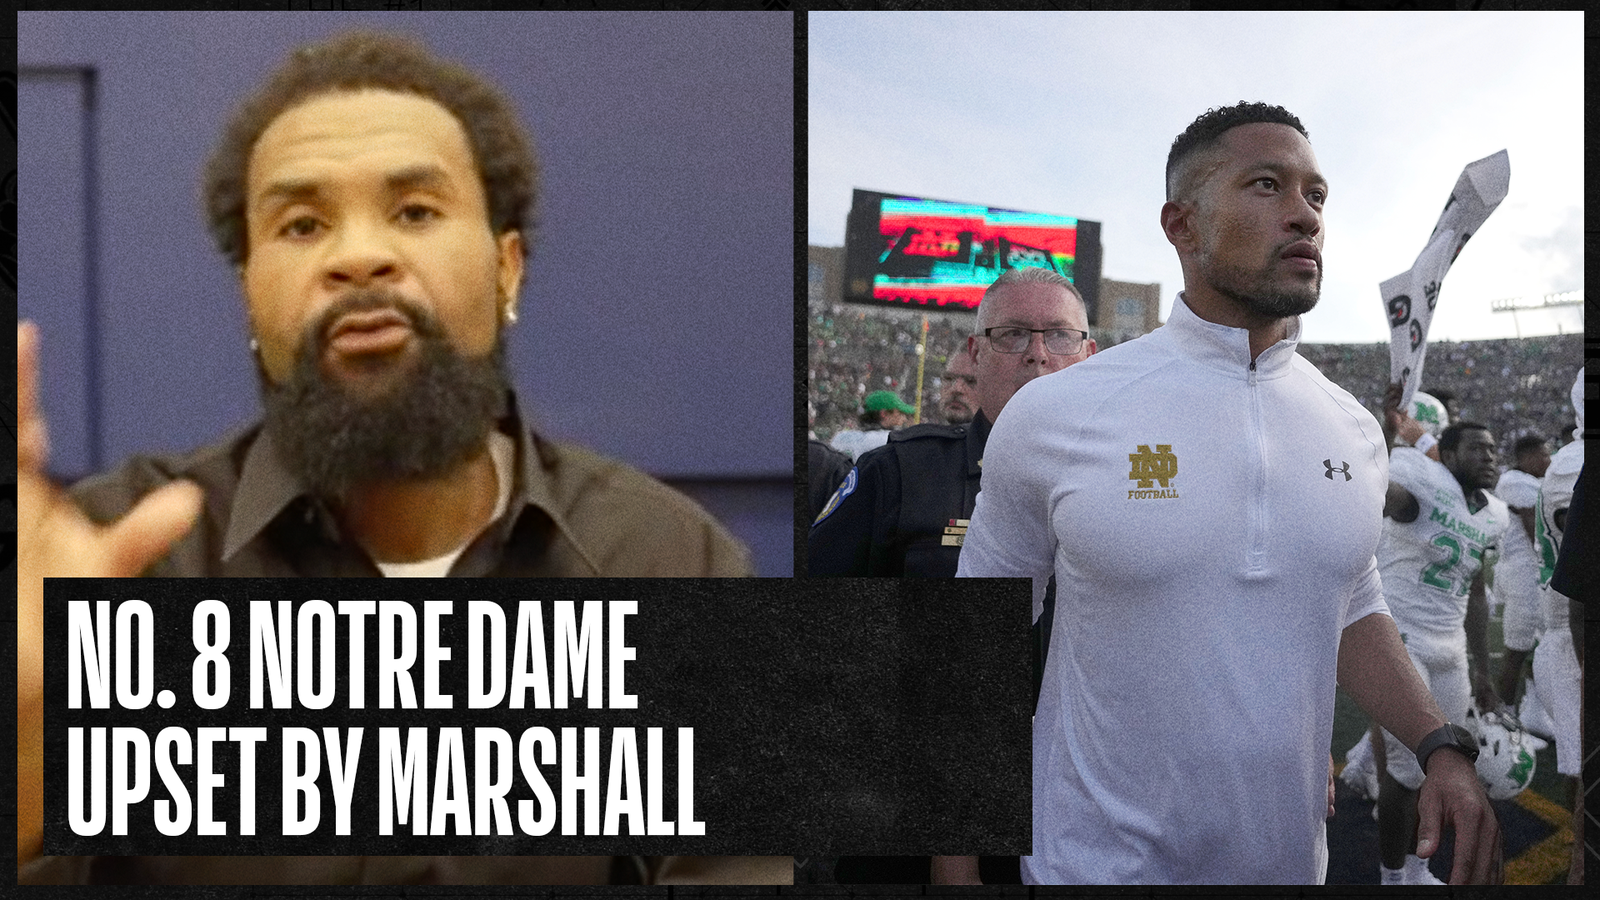 No. 8 Notre Dame is upset by Marshall in South Bend